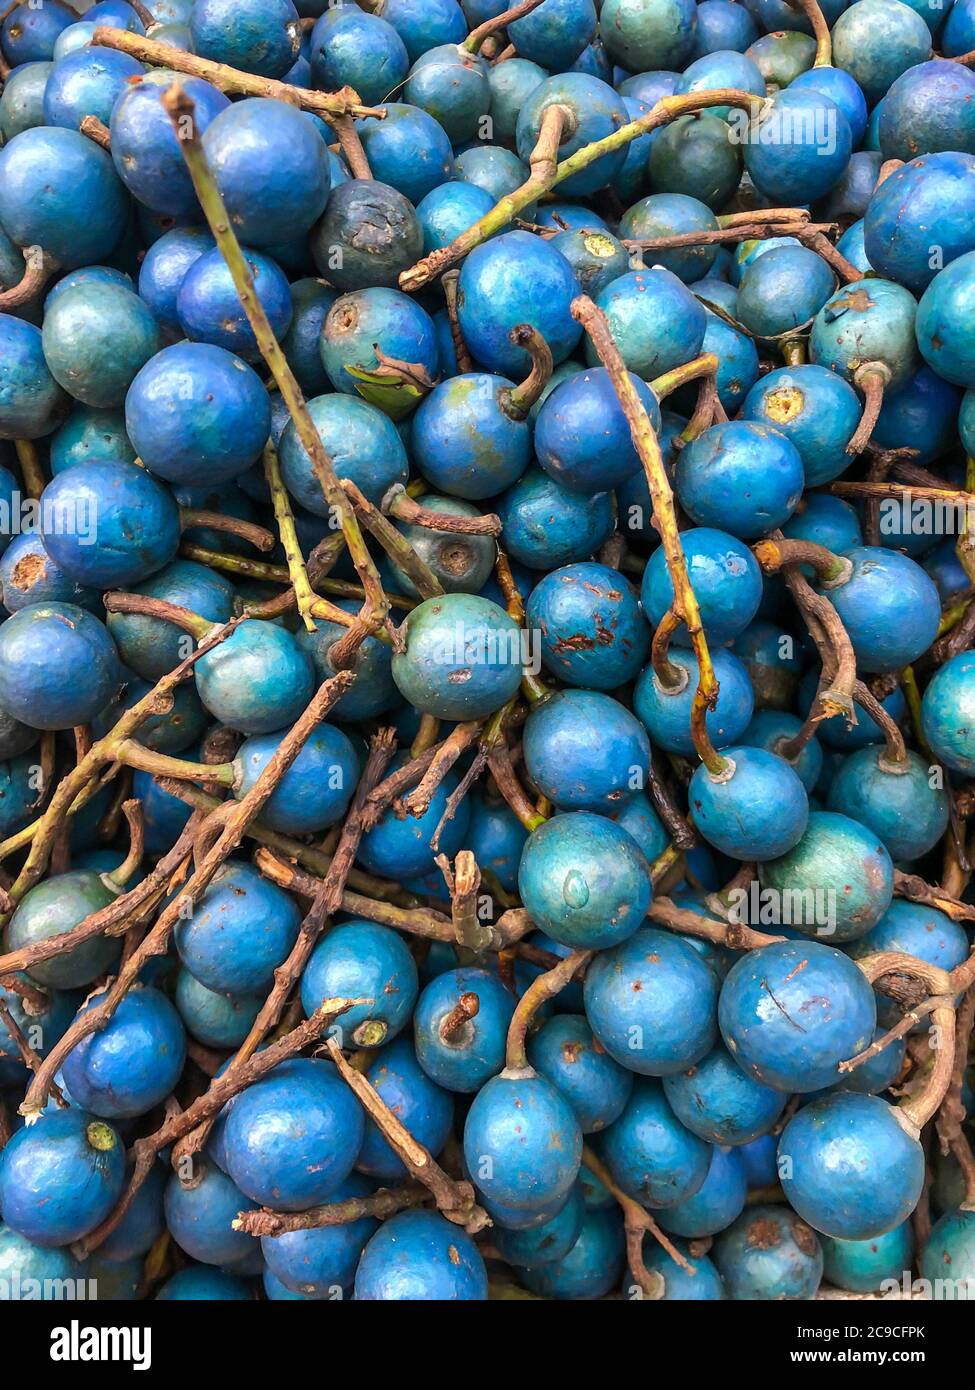 traditional blue olive fruit of Sri Lanka in market as a background Stock Photo